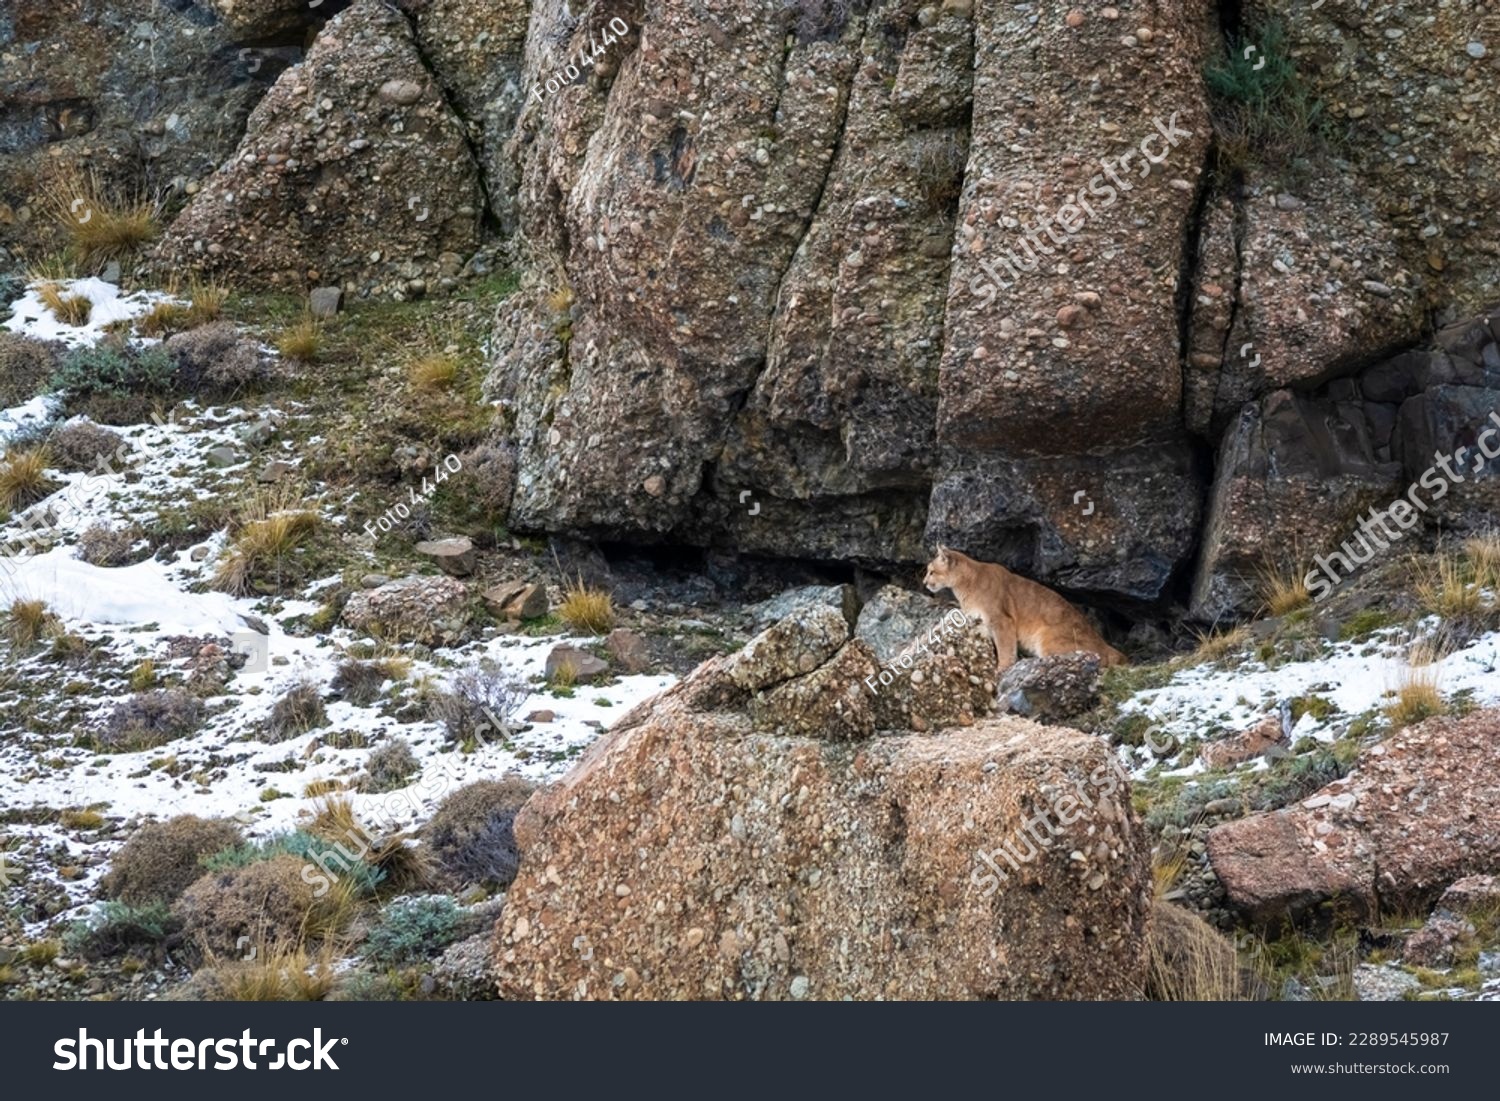 Puma walking in mountain environment, Torres del Paine National Park, Patagonia, Chile. #2289545987